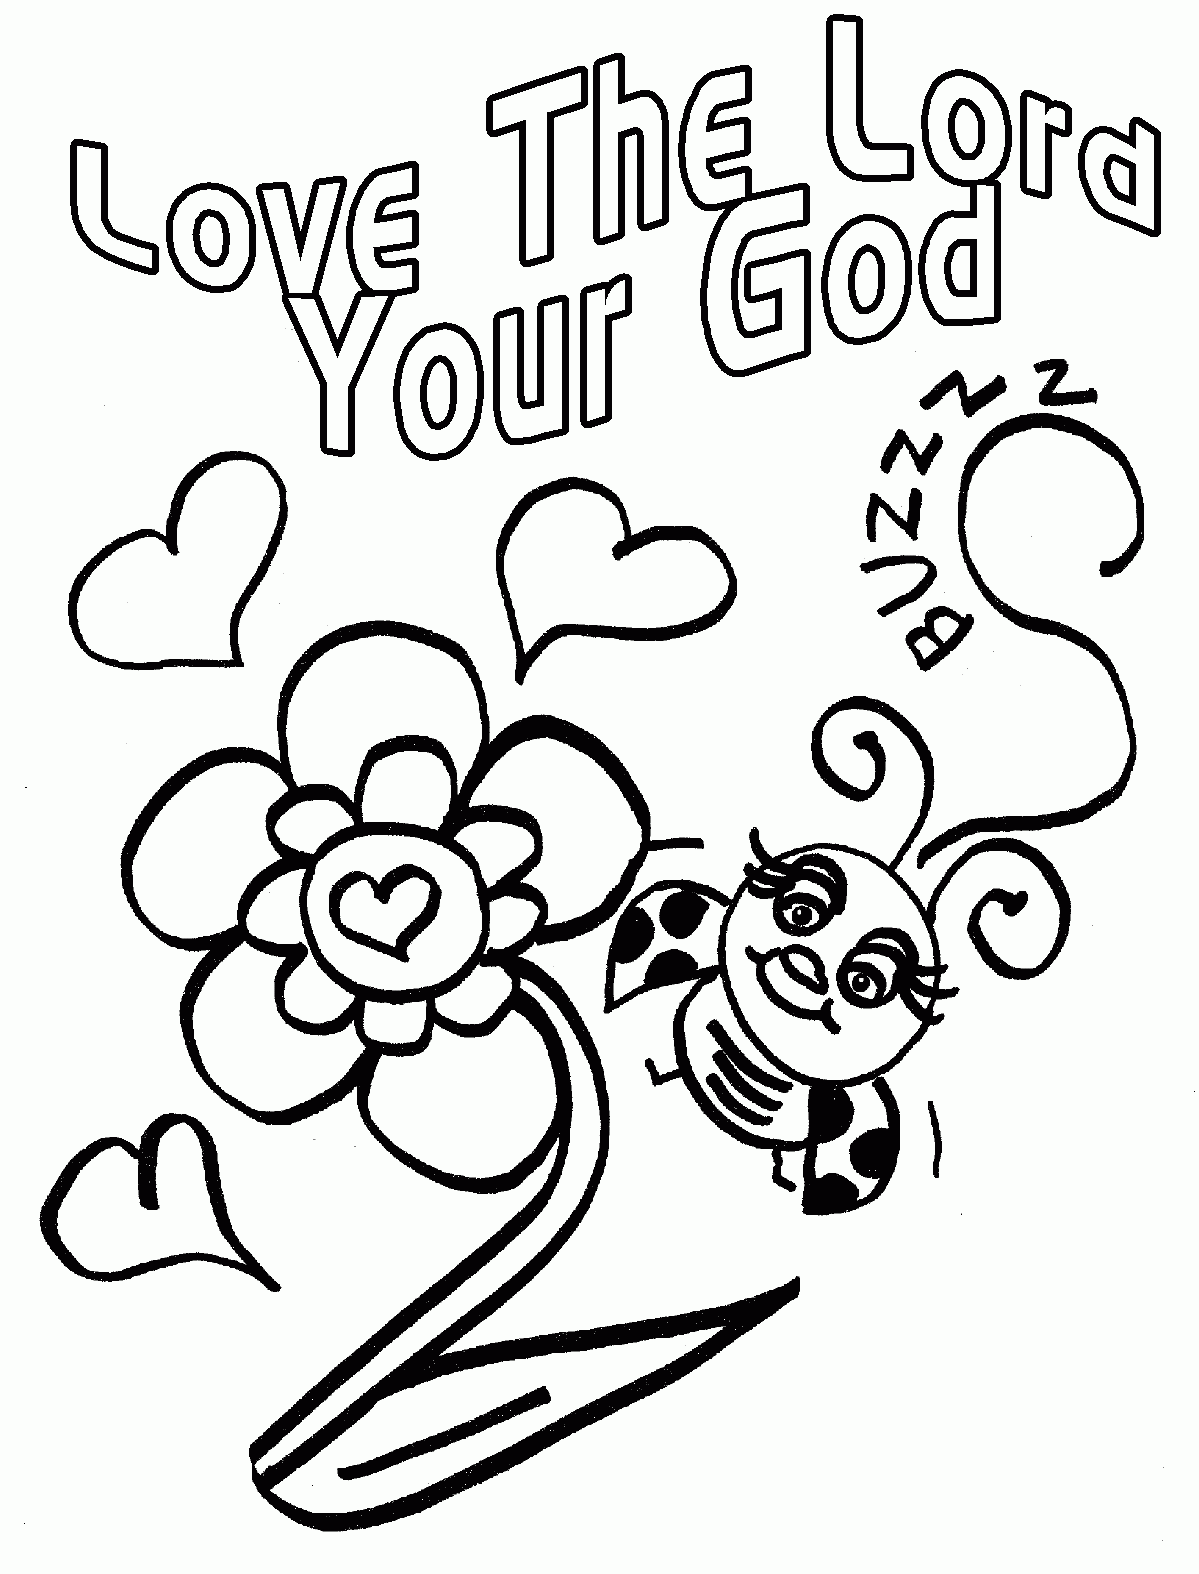 Love The Lord Your God Is Love Coloring Pages Free Printable For Kids